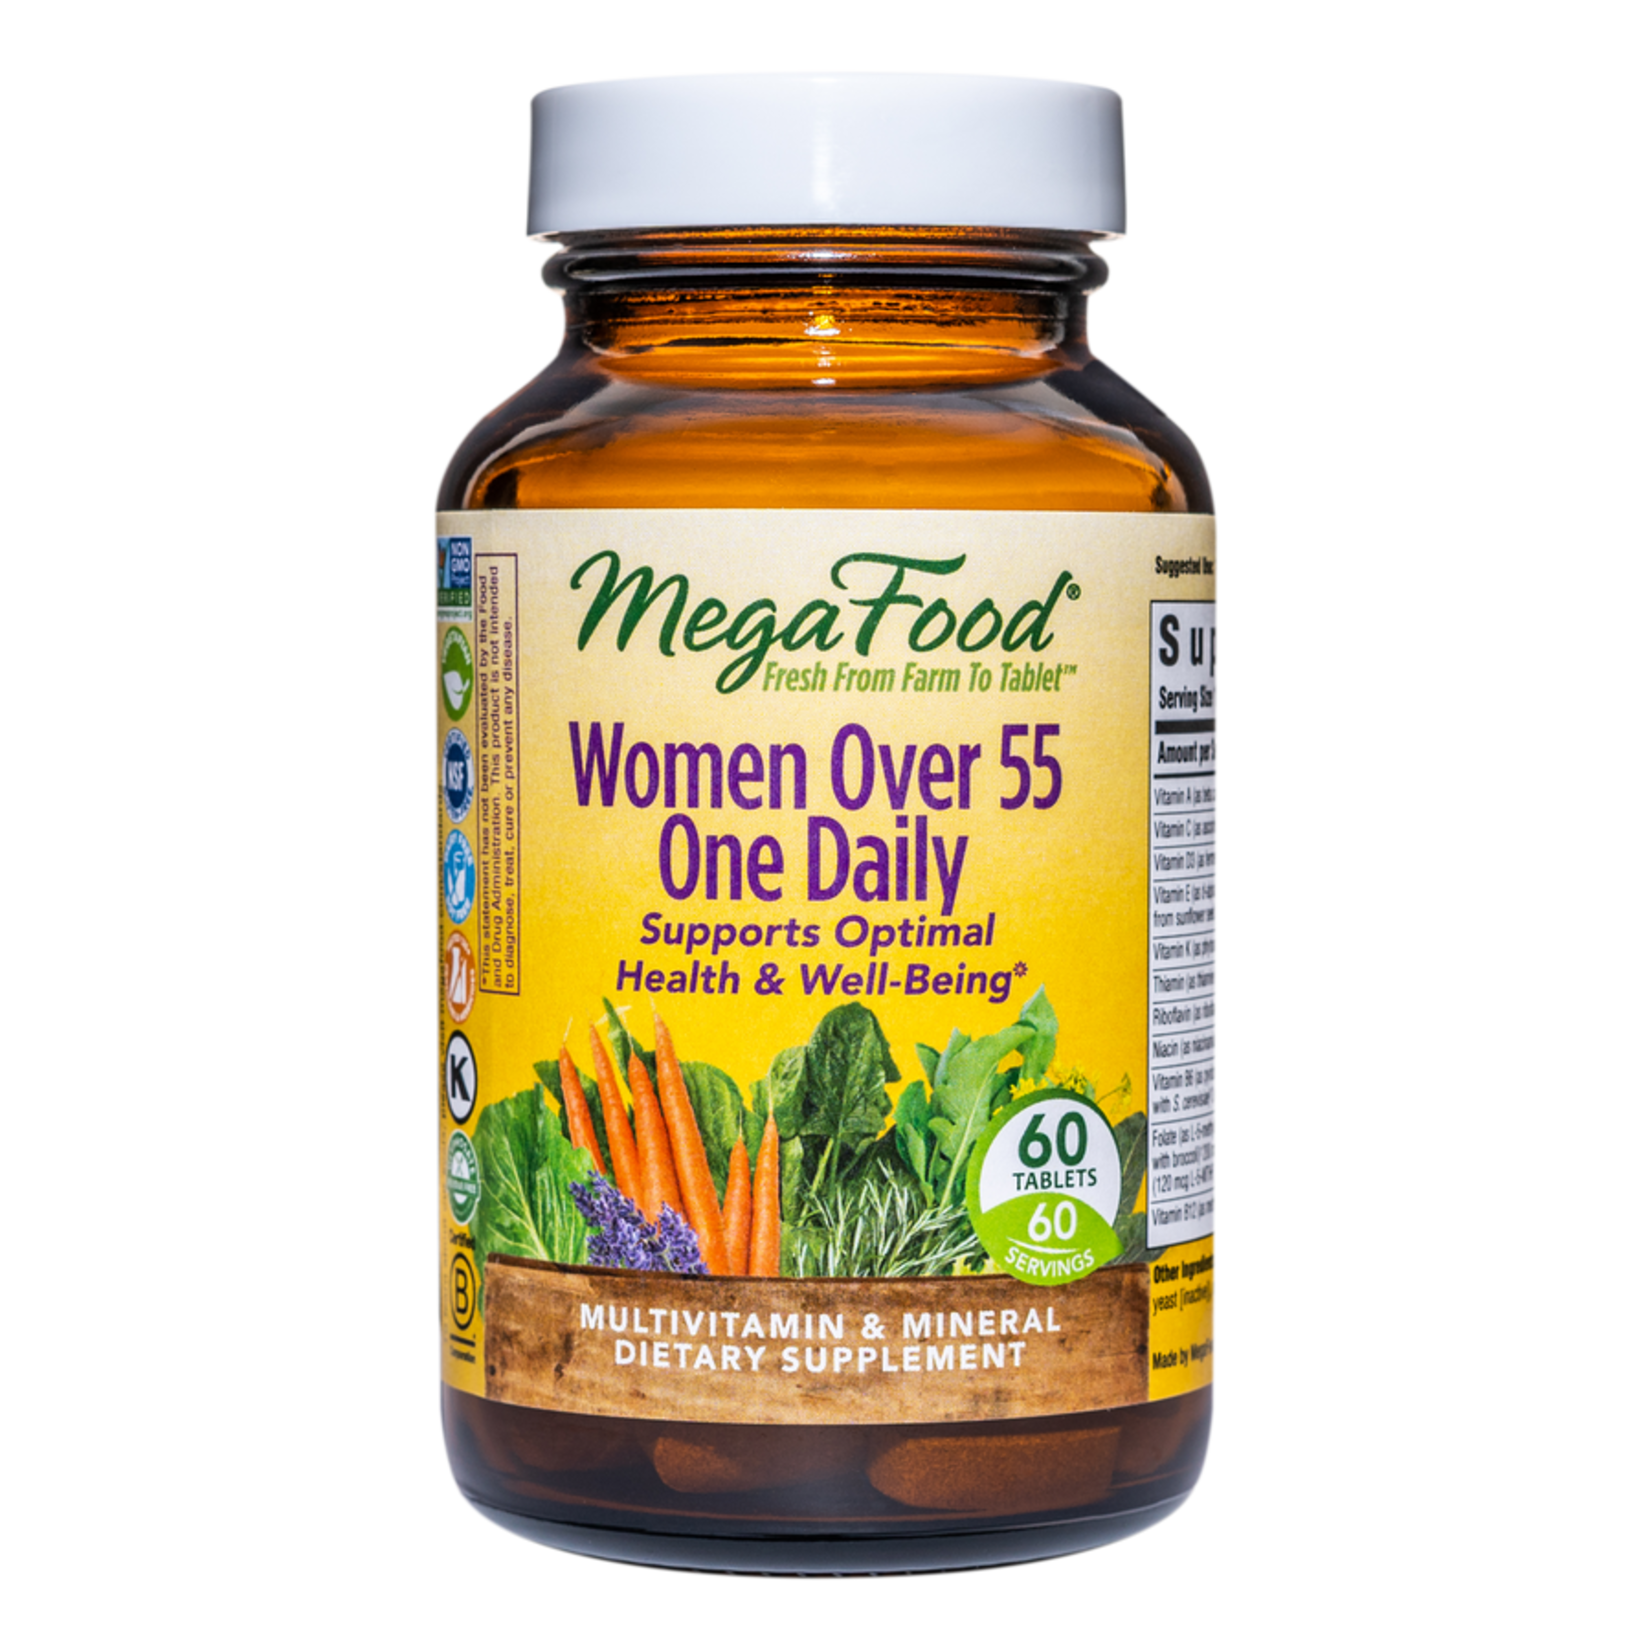 Megafood Megafood - Women Over 55 One Daily - 60 Tablets